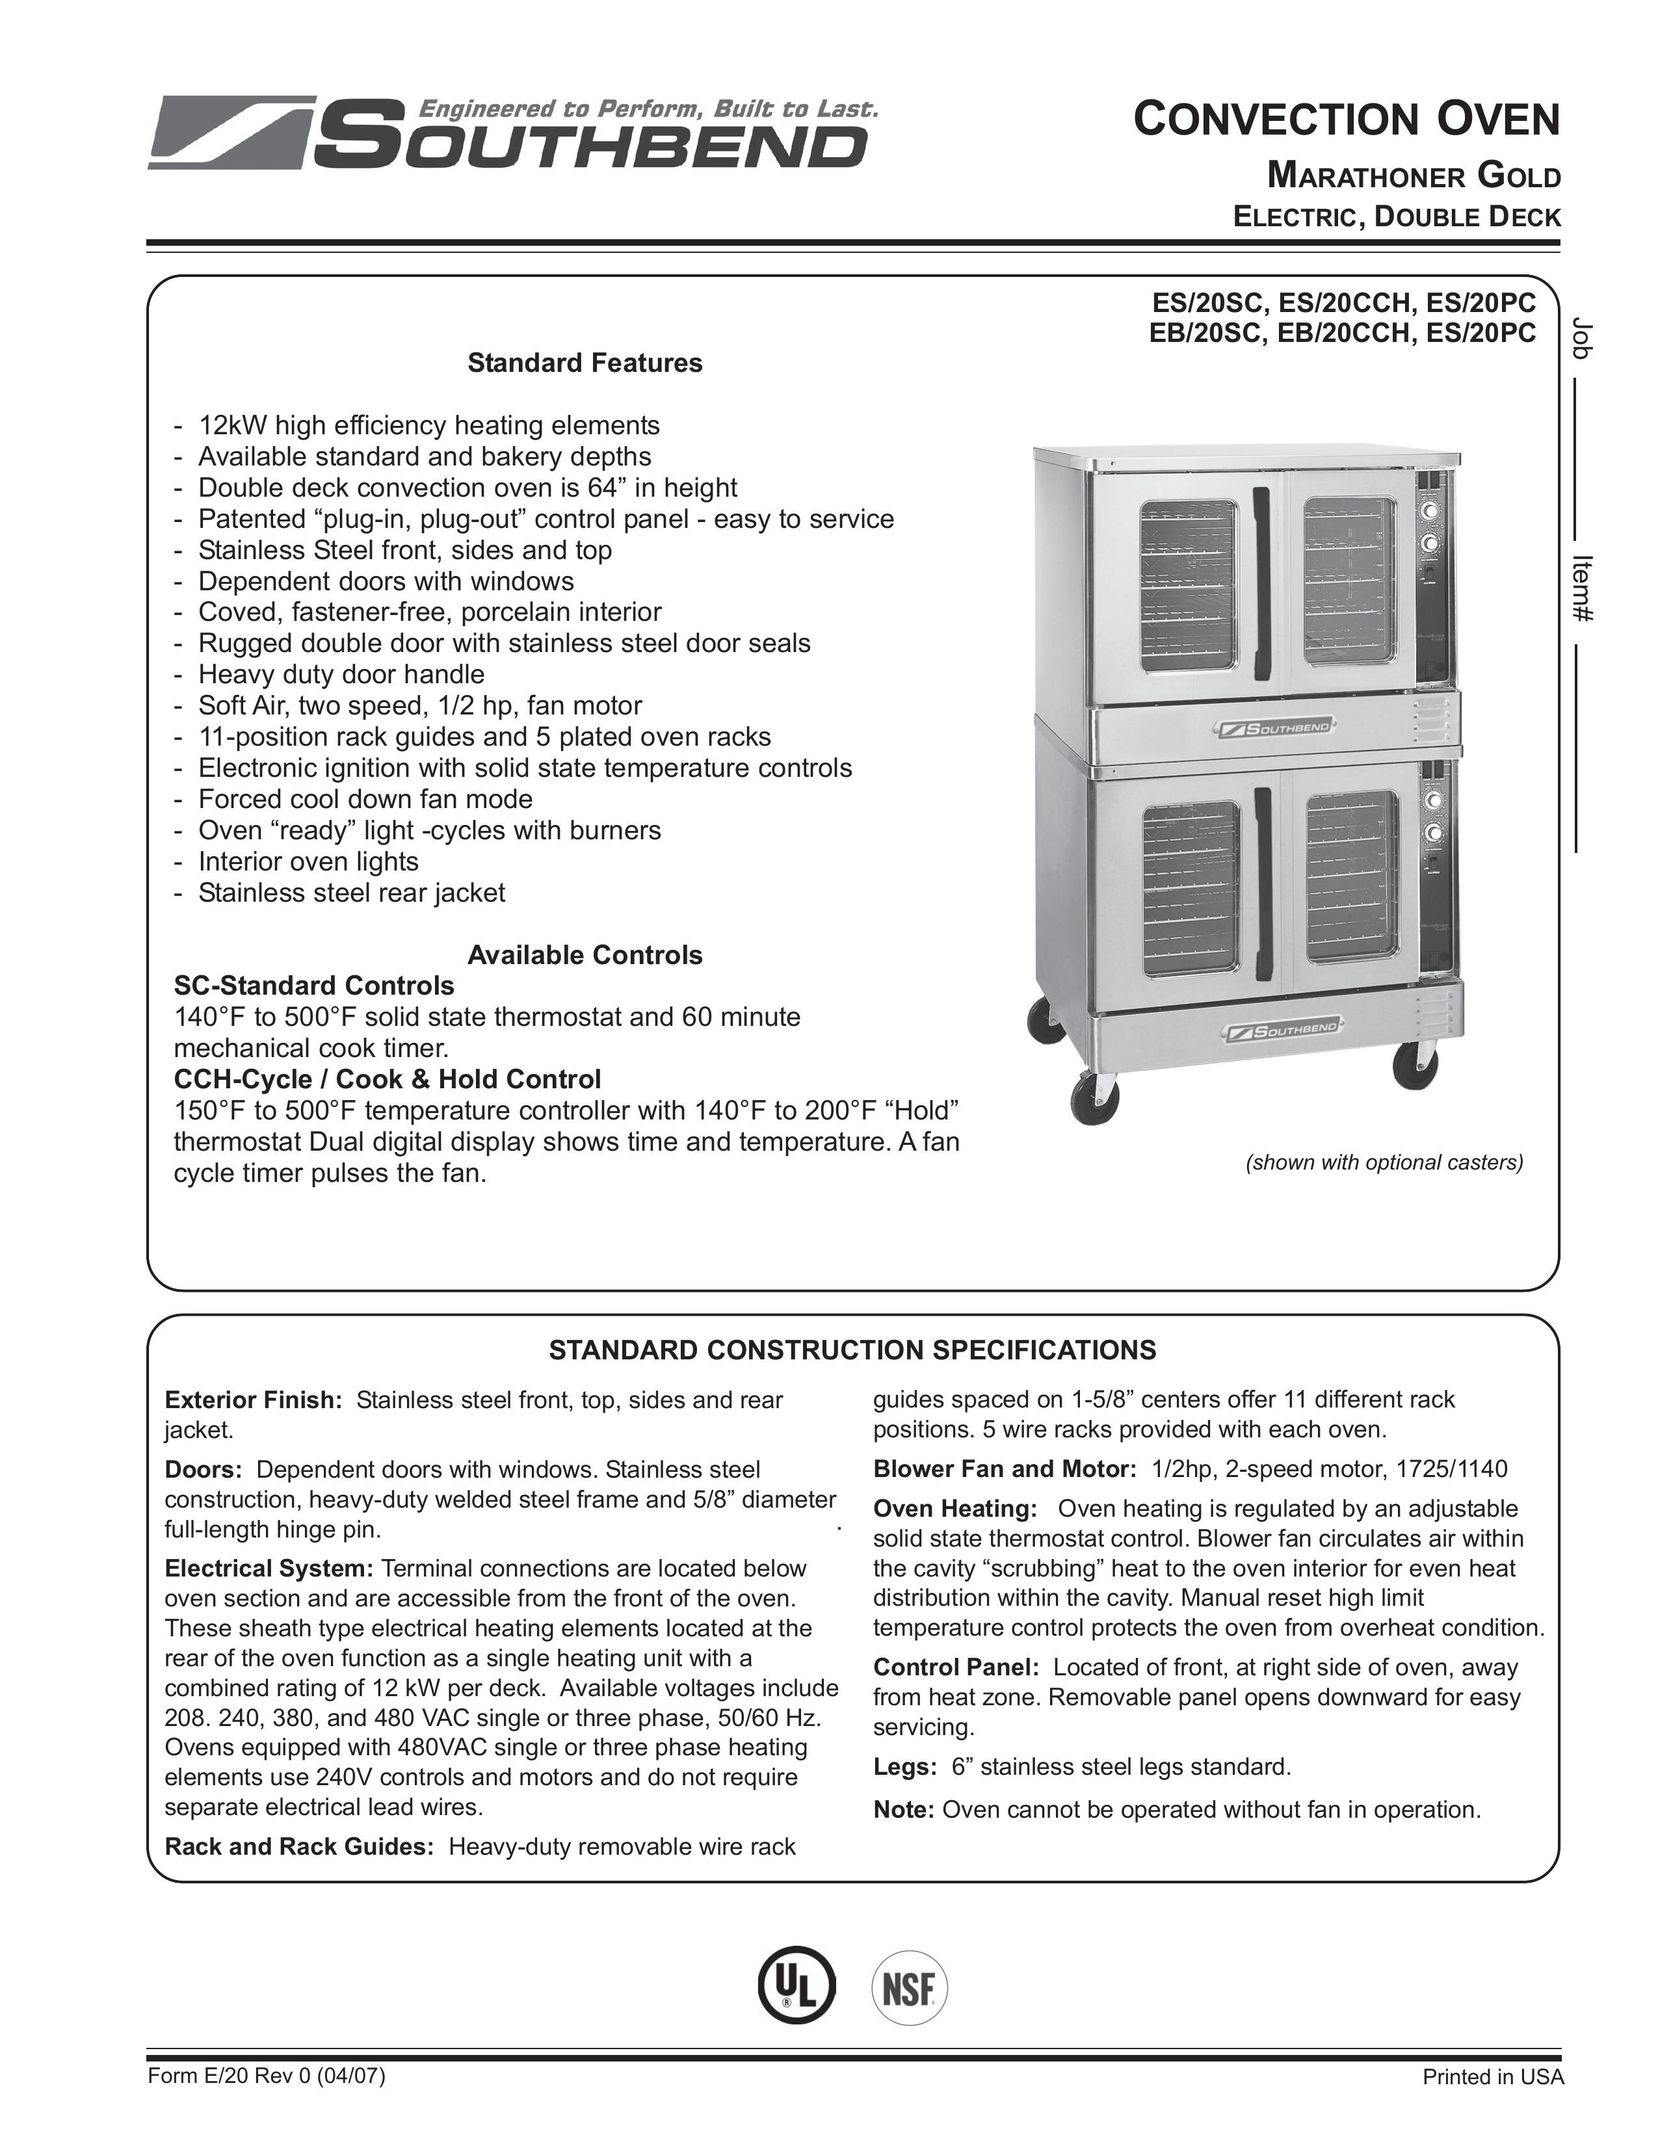 Southbend ES/20PC, EB/20SC Convection Oven User Manual